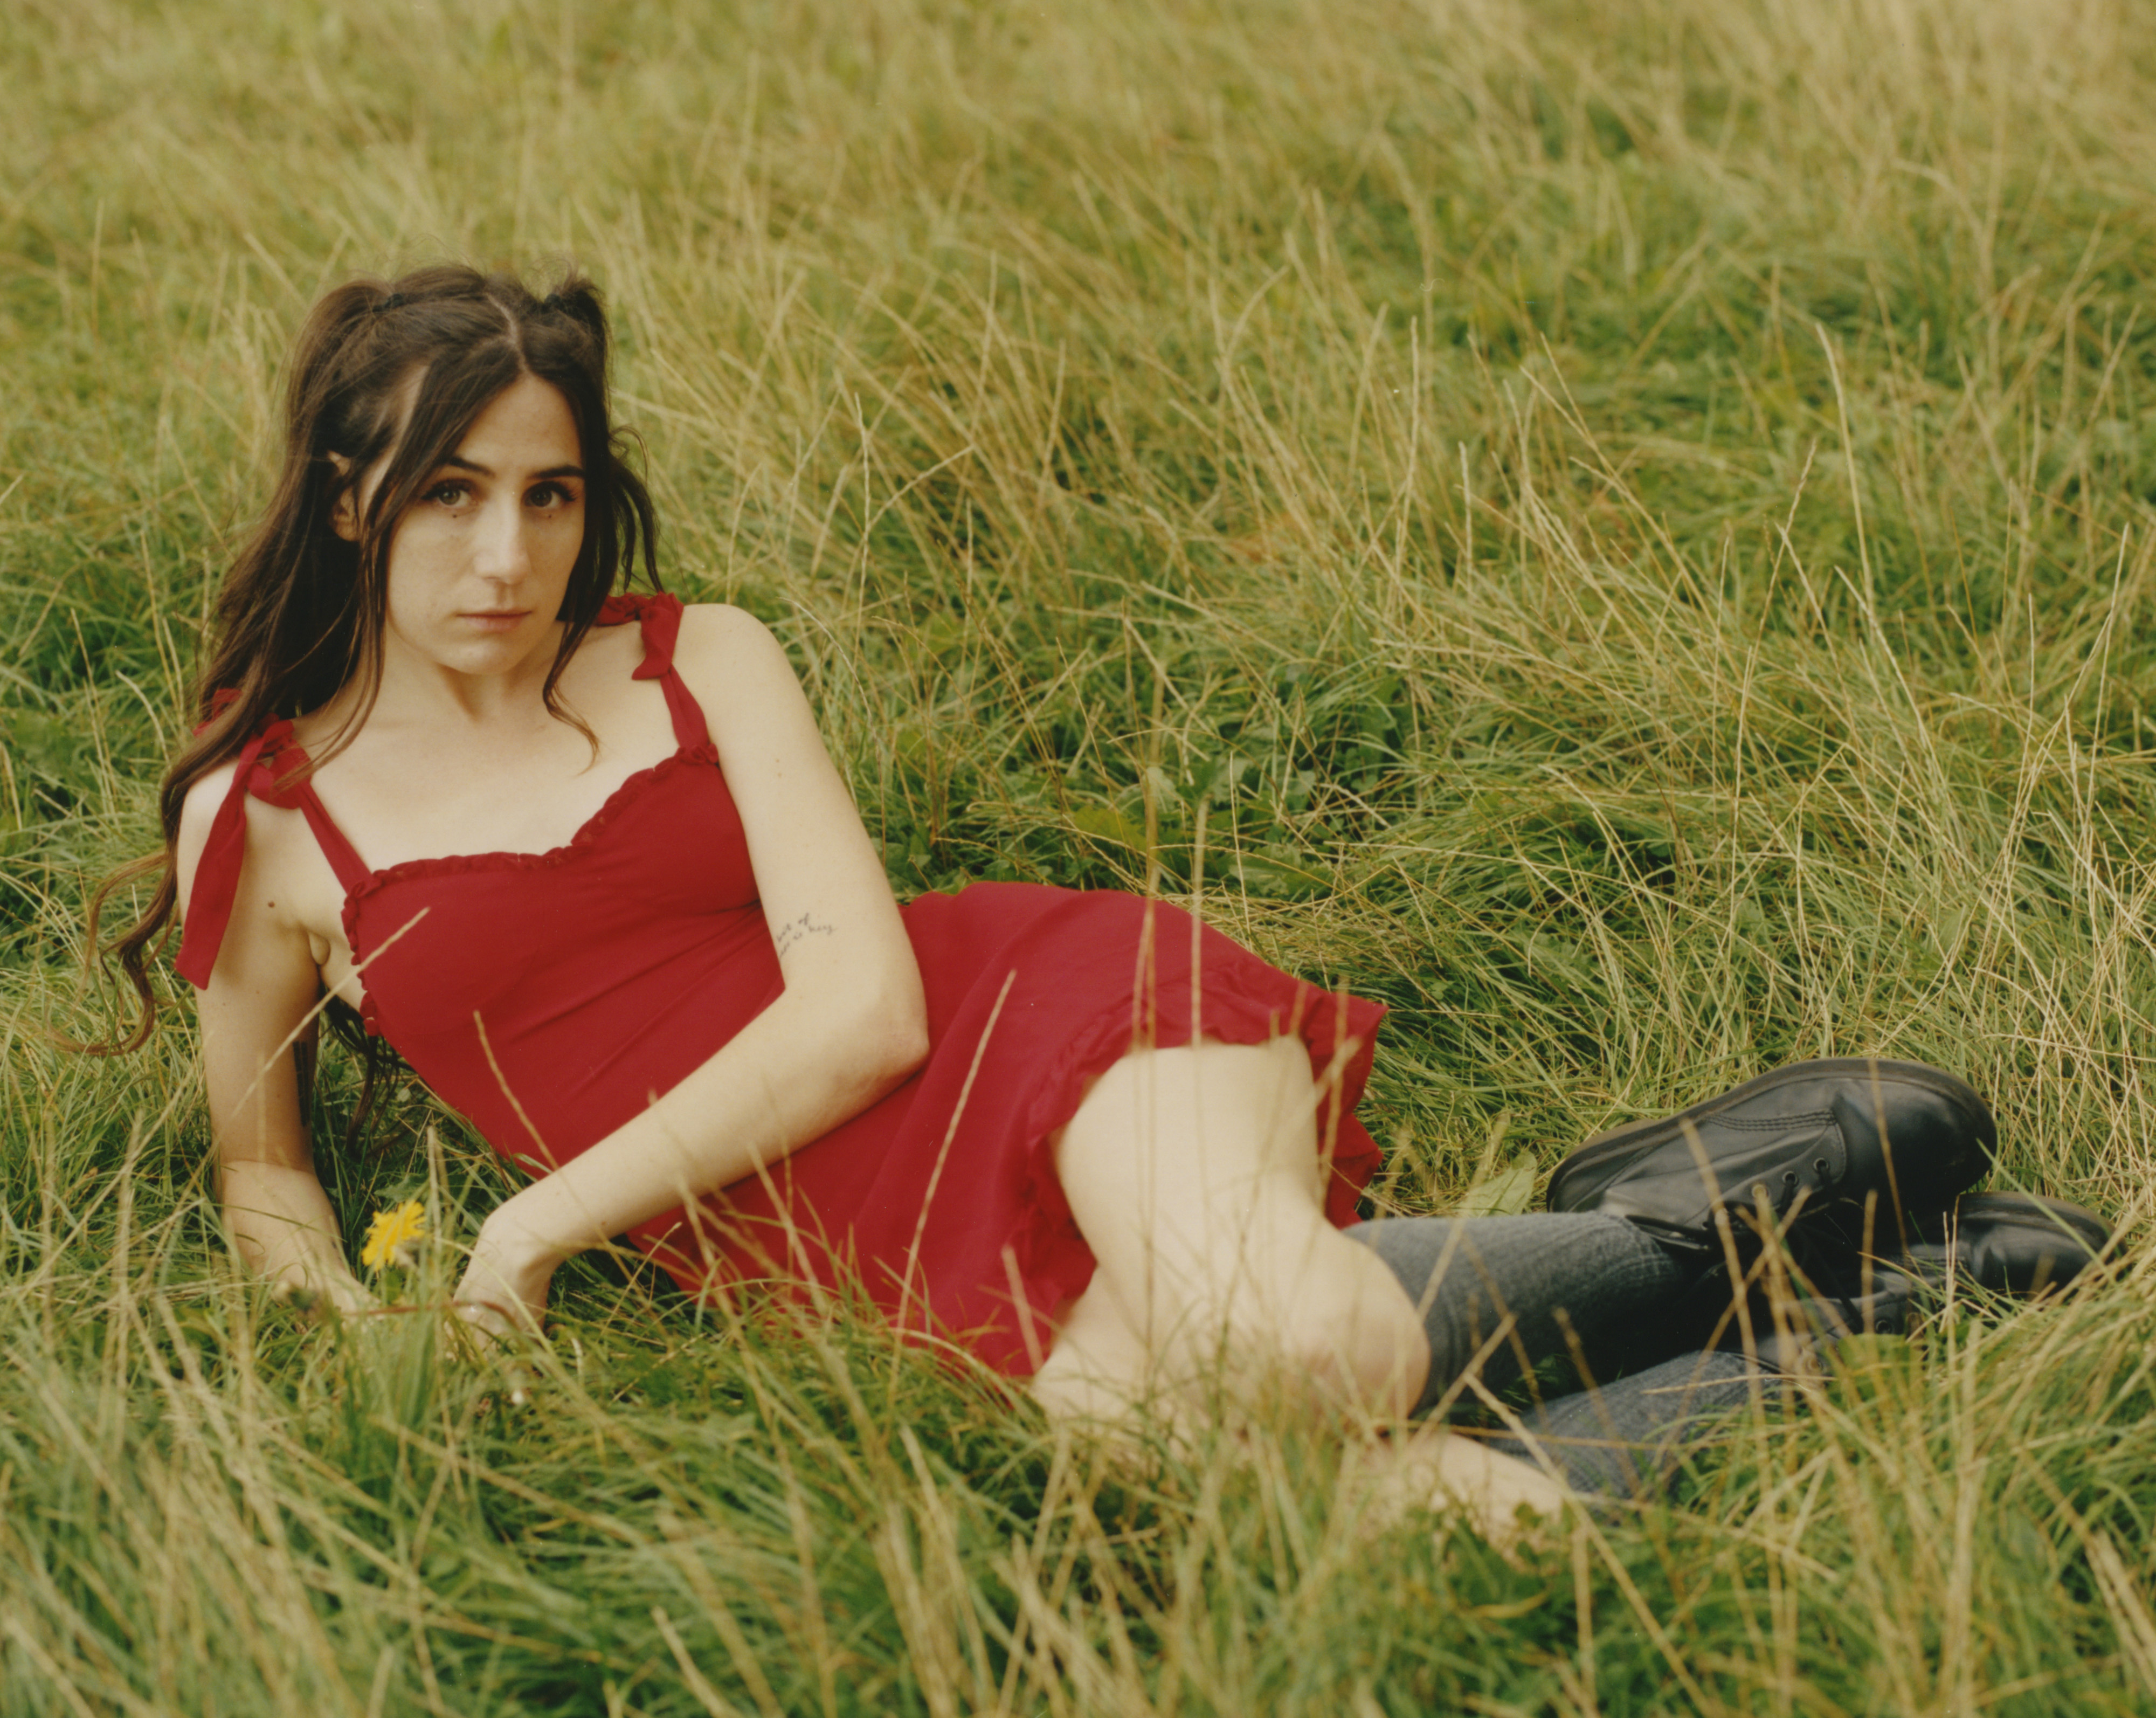 dodie lying in a field of grass, wearing a bright red dress